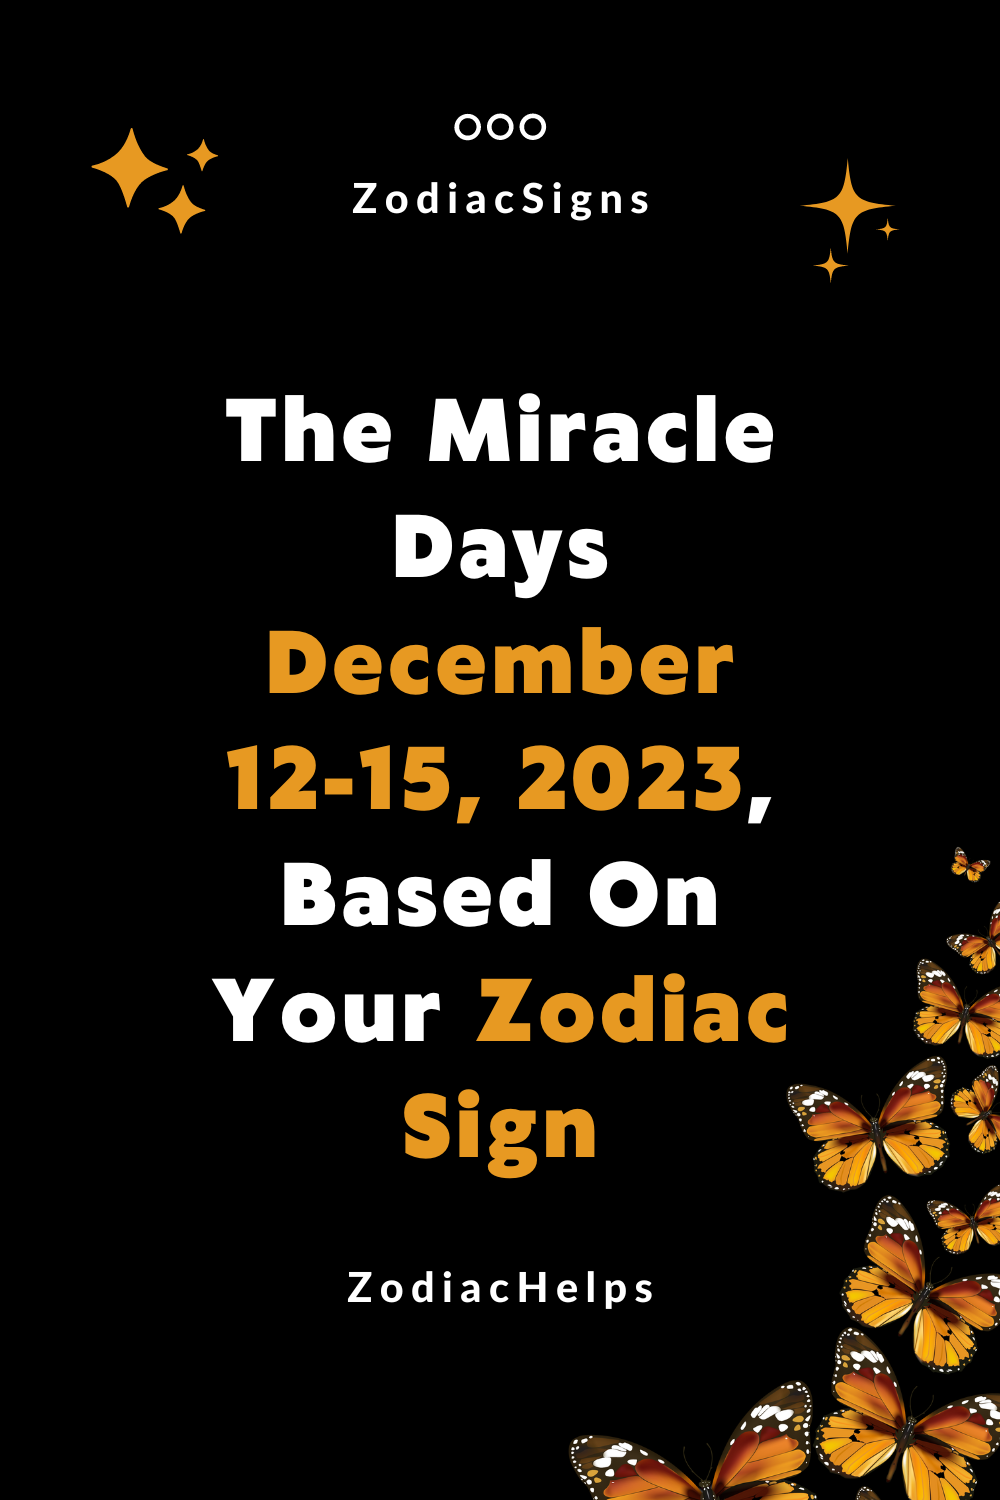 The Miracle Days December 12-15, 2023, Based On Your Zodiac Sign